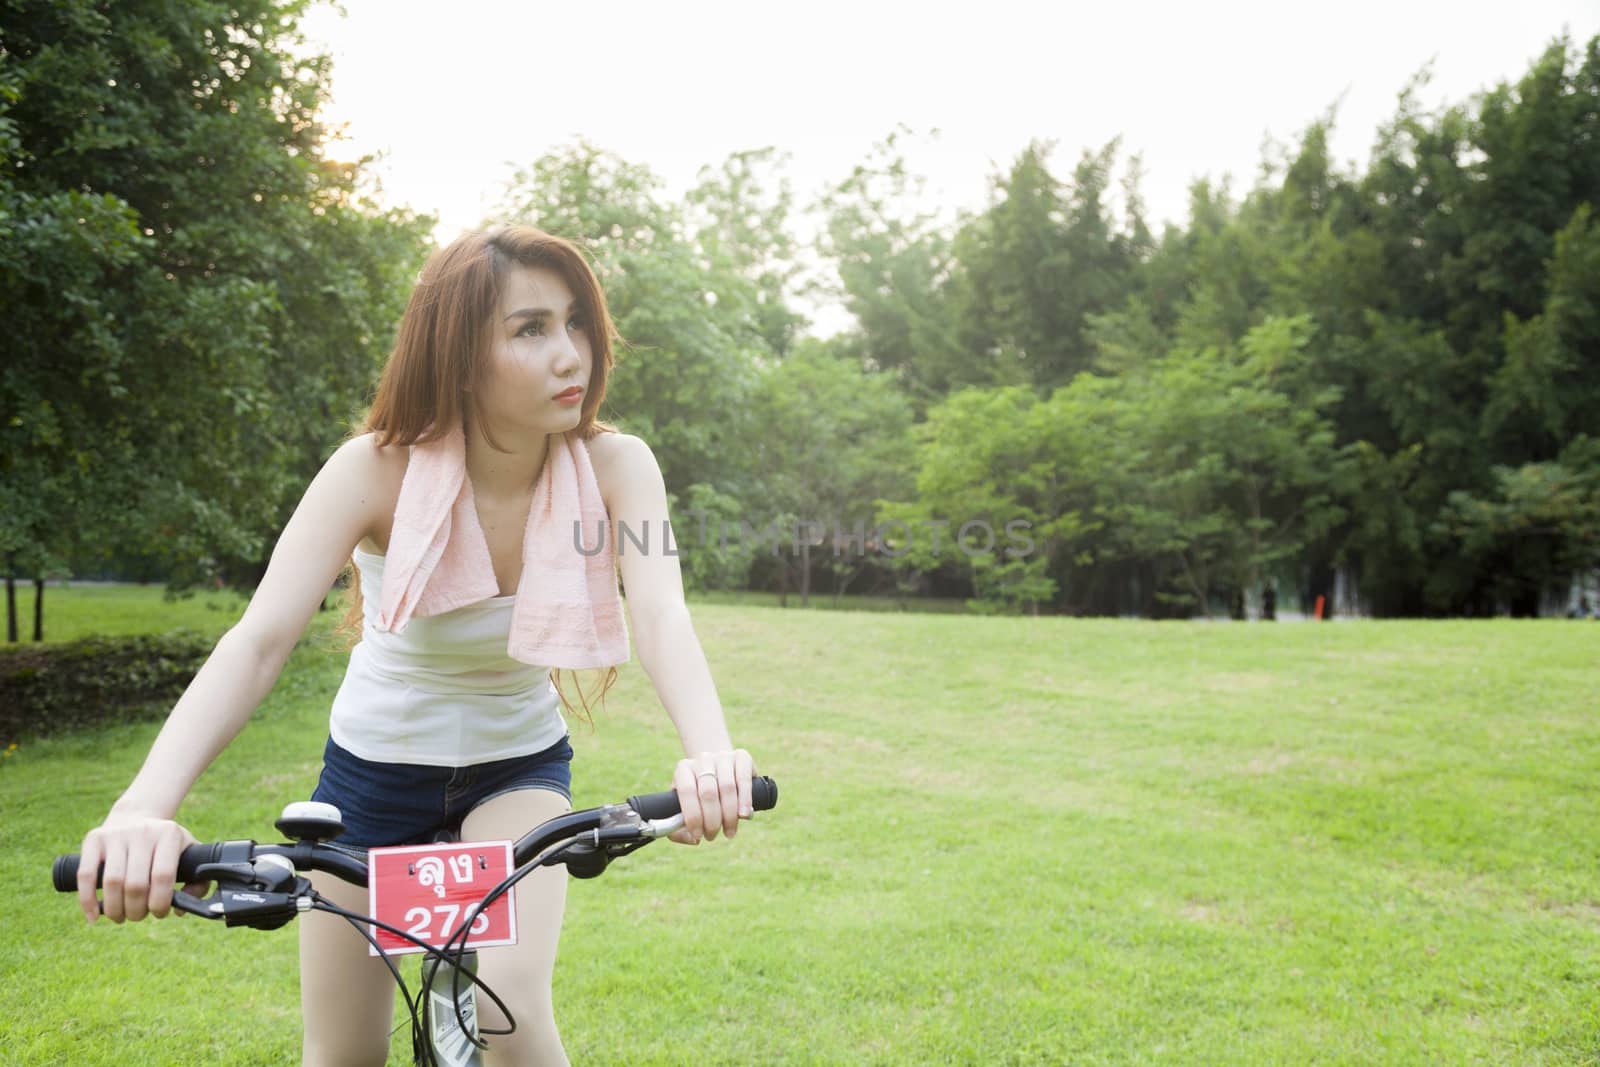 Woman riding an exercise bike in the park. On the lawn in the evening.